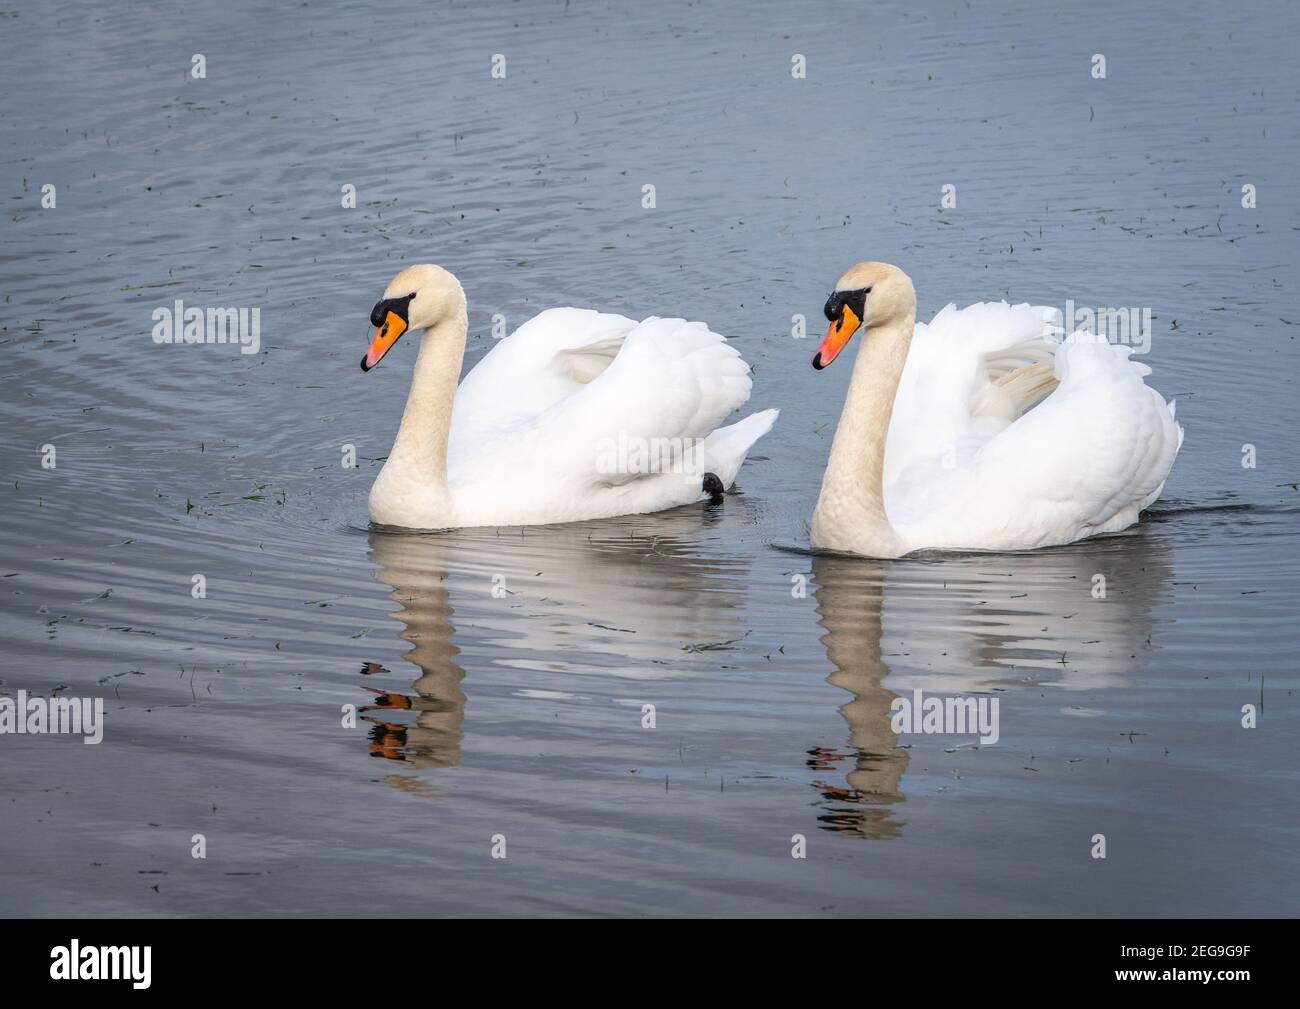 Two swans swiming on a flooded field on a clear day with reflections in the water. Stock Photo